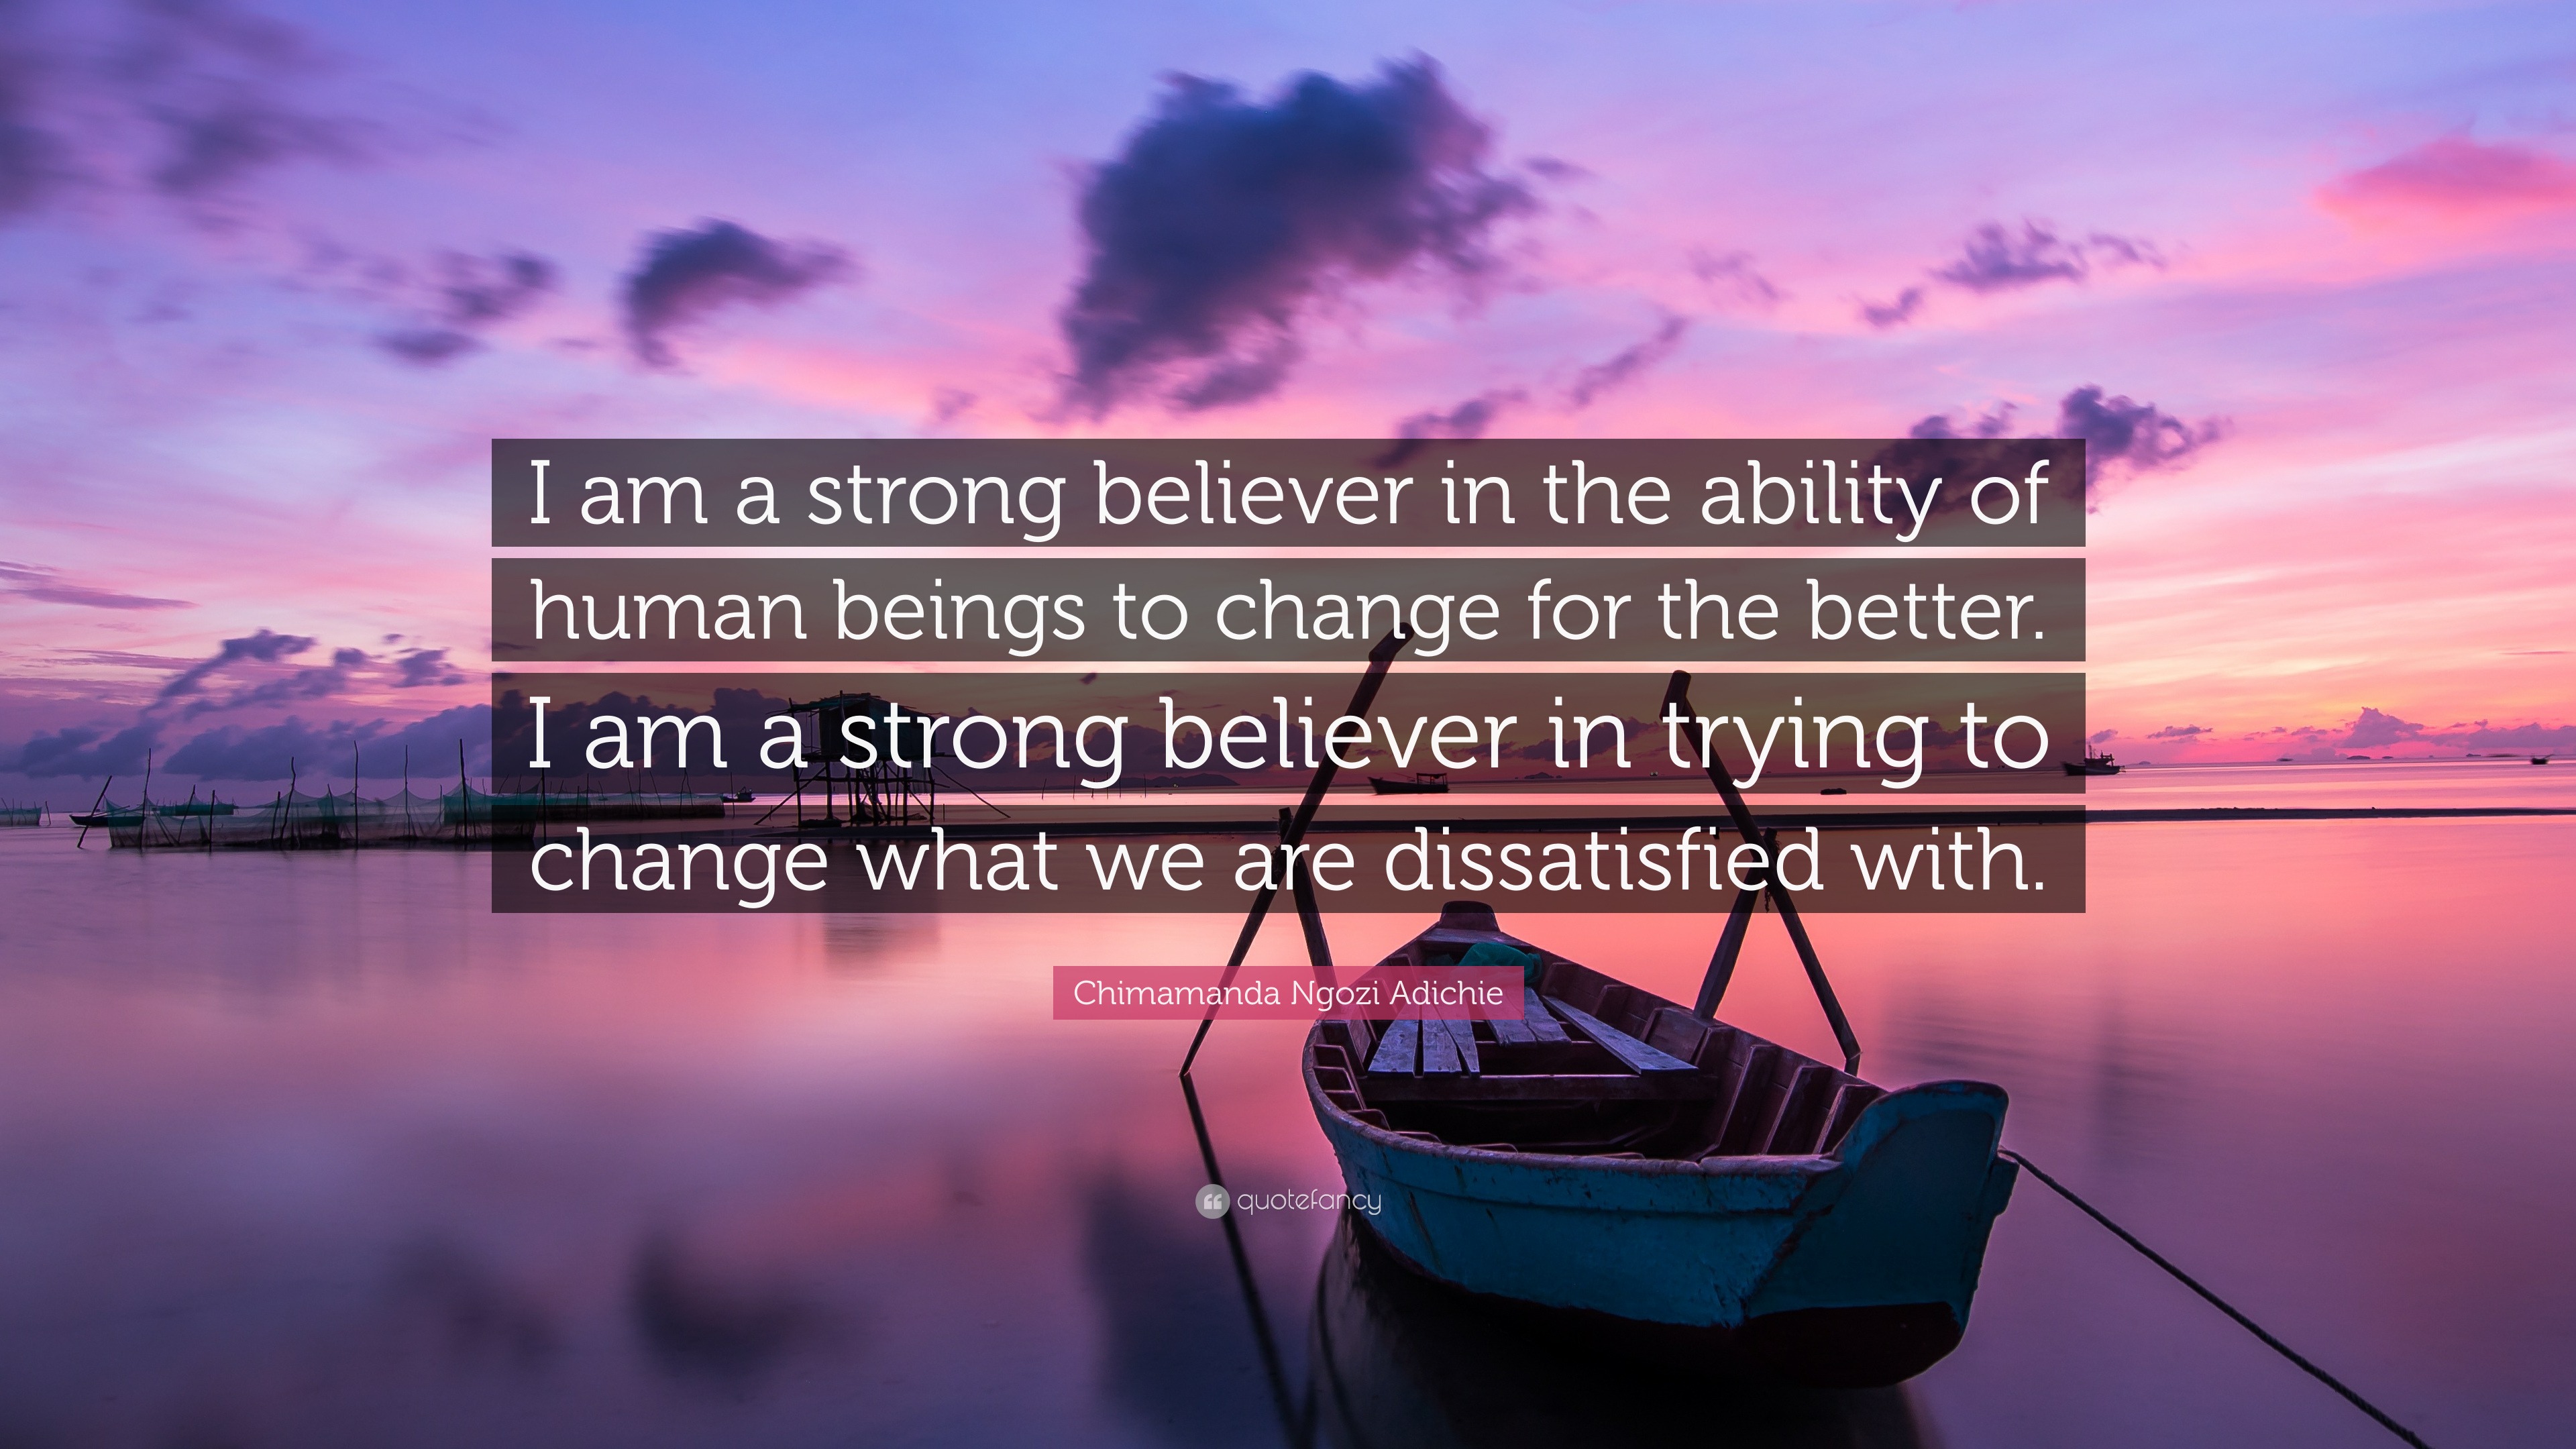 Chimamanda Ngozi Adichie Quote: “I am a strong believer in the ability ...